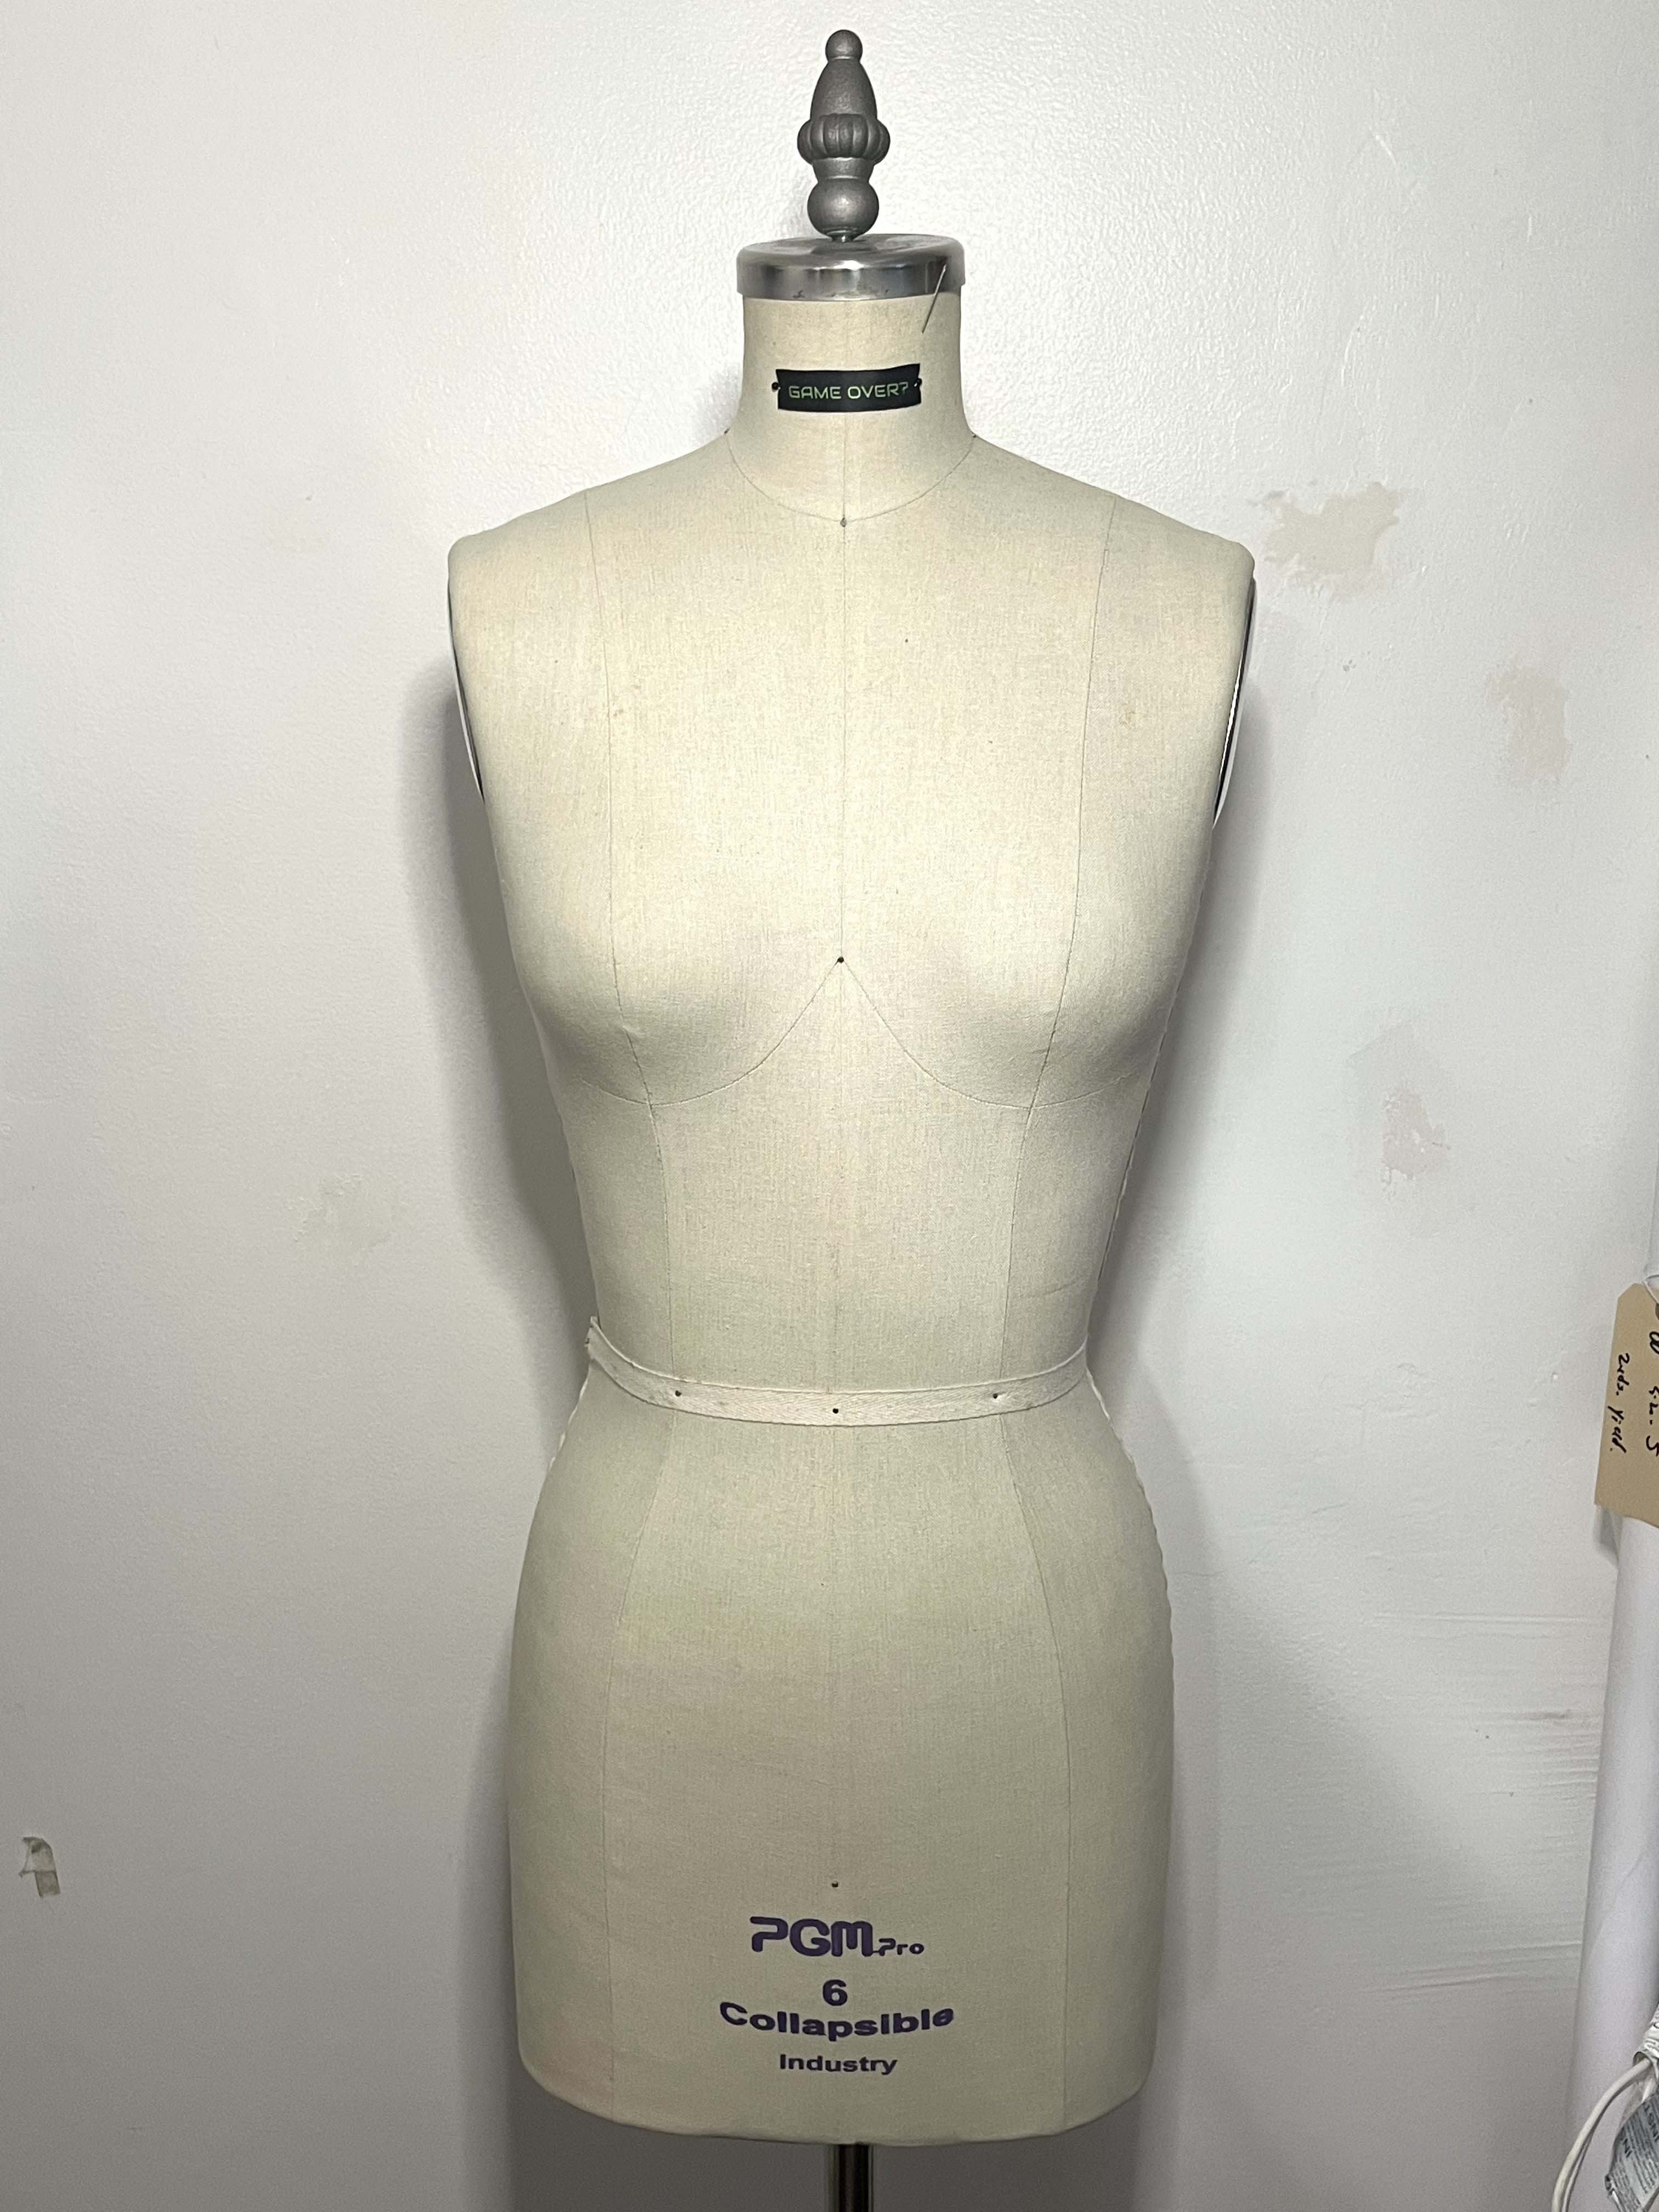 Hi everyone, I know Tailors need a good dress form to drapping. But when my  friend aksed me “Why we need a dressform like human size/shape, everybody  has their own size/shape?” I